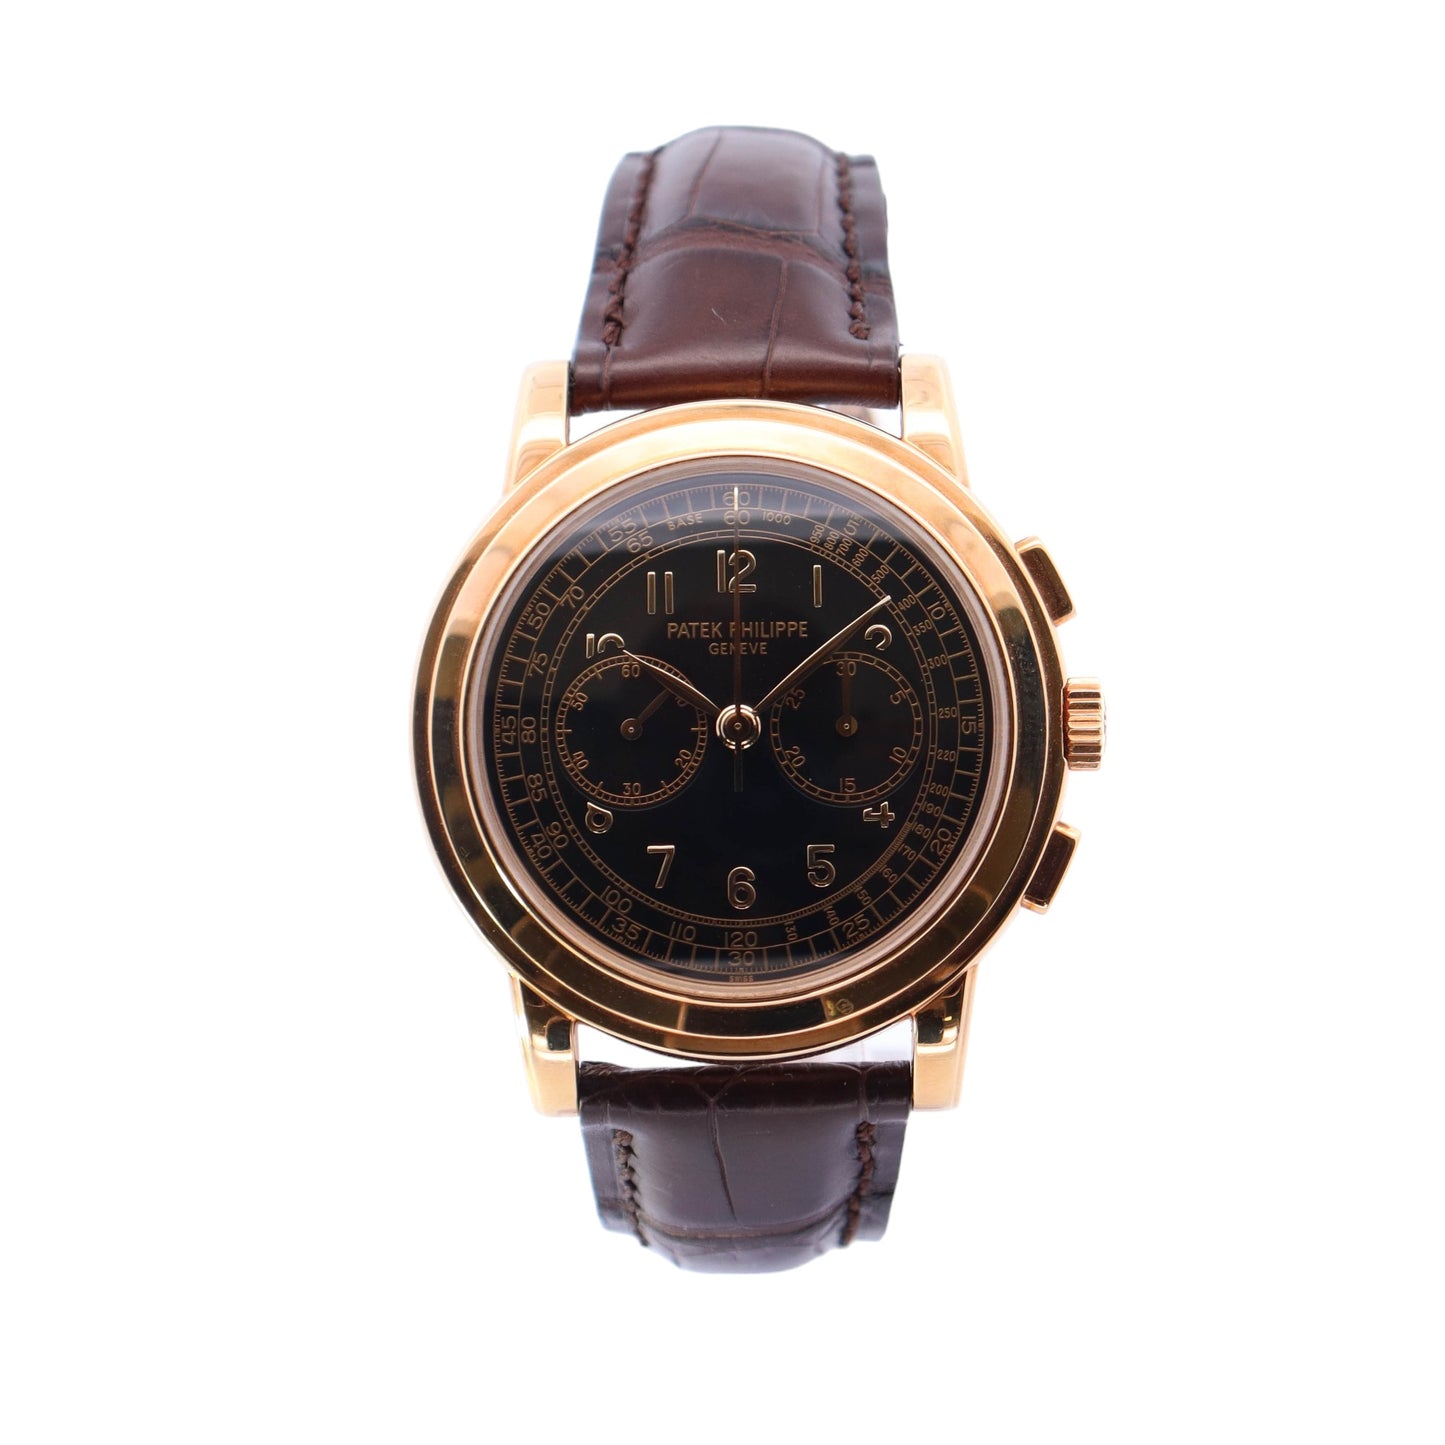 Patek Philippe Chronograph Yellow Gold 42mm Chocolate Brown Chronograph Dial Watch Reference# 5070J-001 - Happy Jewelers Fine Jewelry Lifetime Warranty